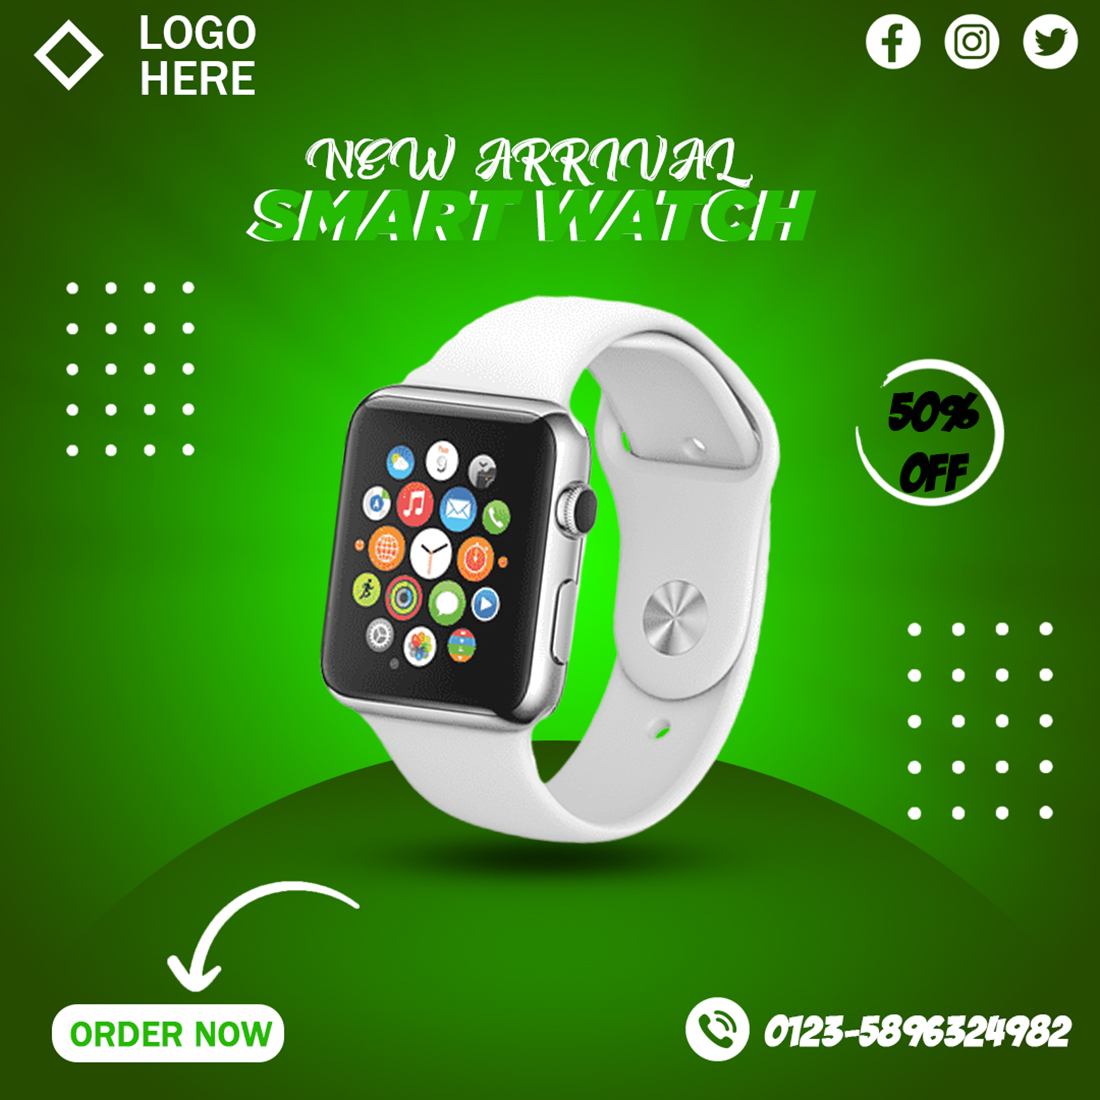 Smart Watch Social Media Post preview image.